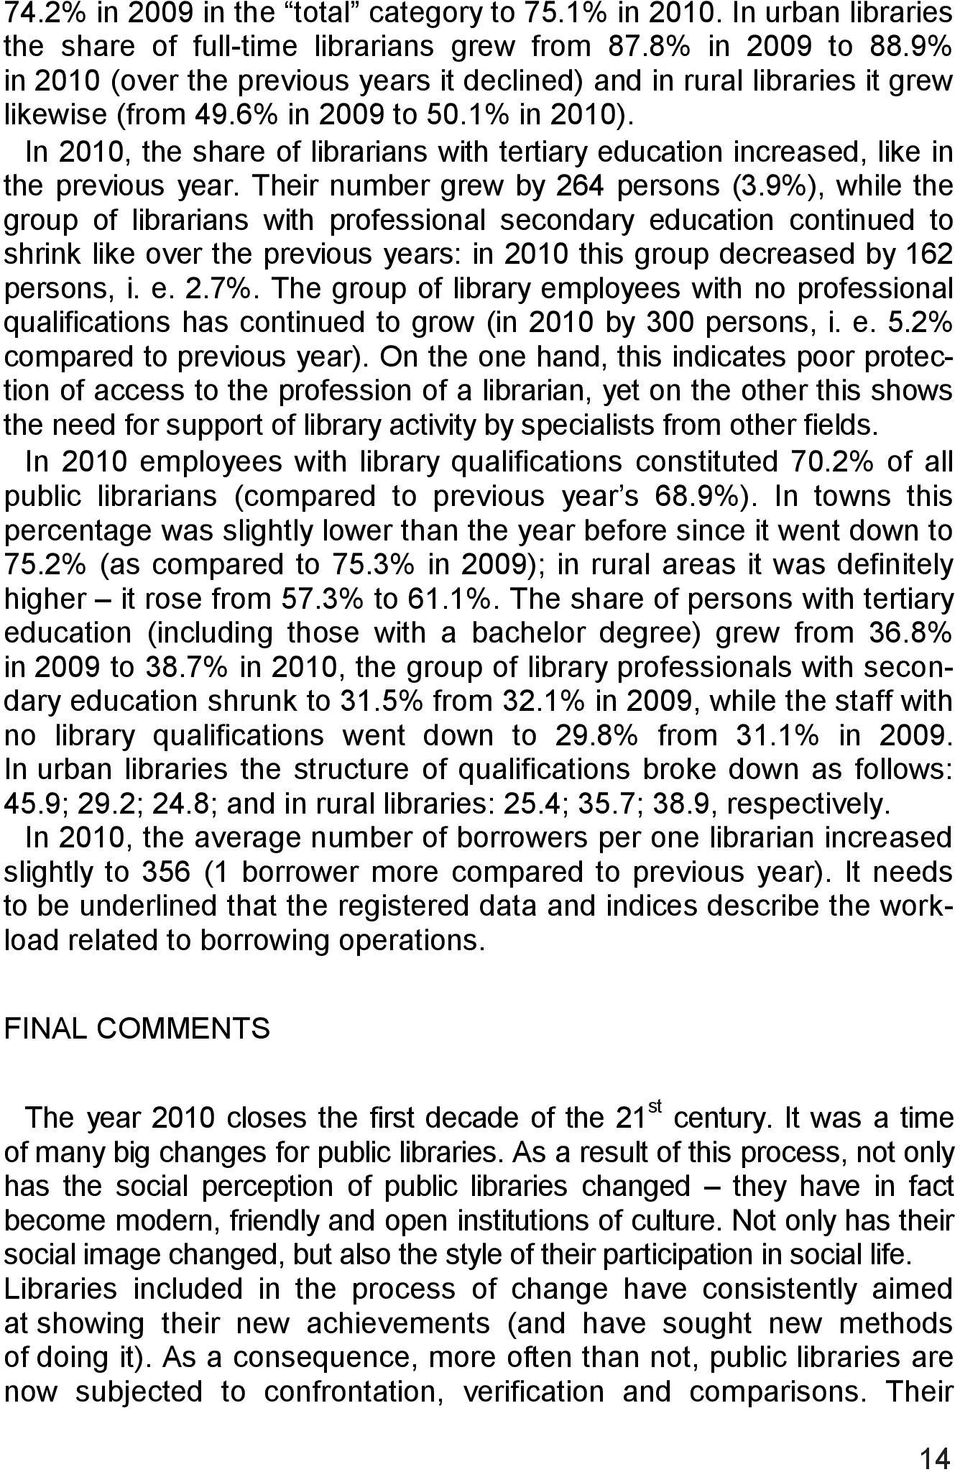 In 2010, the share of librarians with tertiary education increased, like in the previous year. Their number grew by 264 persons (3.